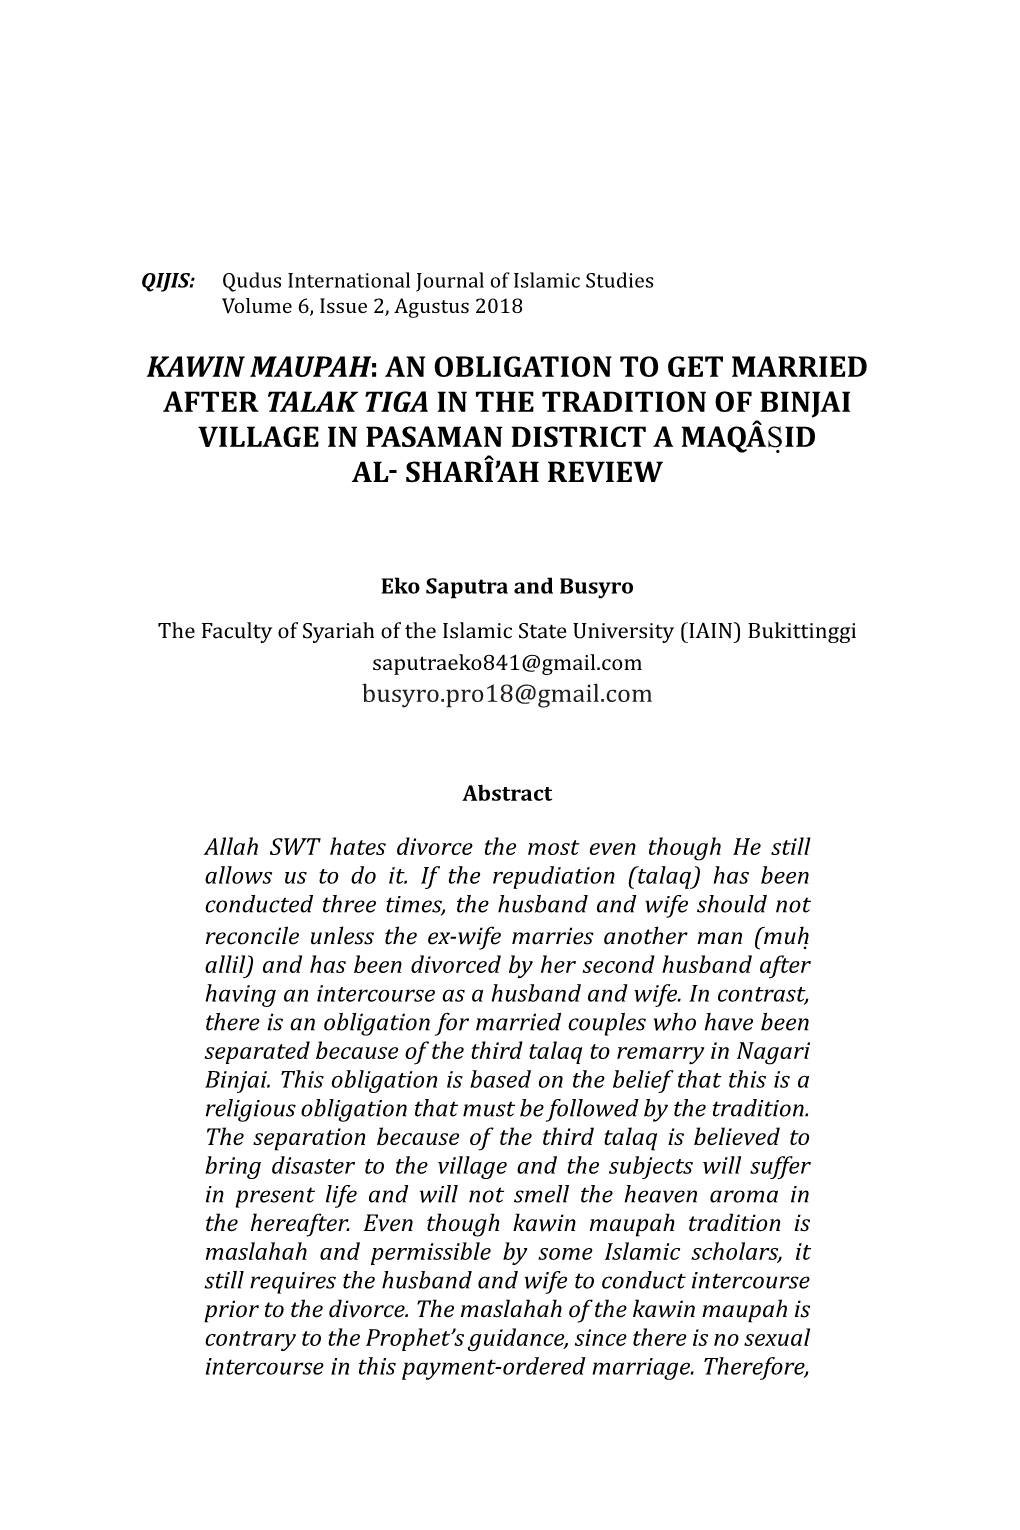 Kawin Maupah: an Obligation to Get Married After Talak Tiga in the Tradition of Binjai Village in Pasaman District a Maqâs}Id Al- Sharî’Ah Review